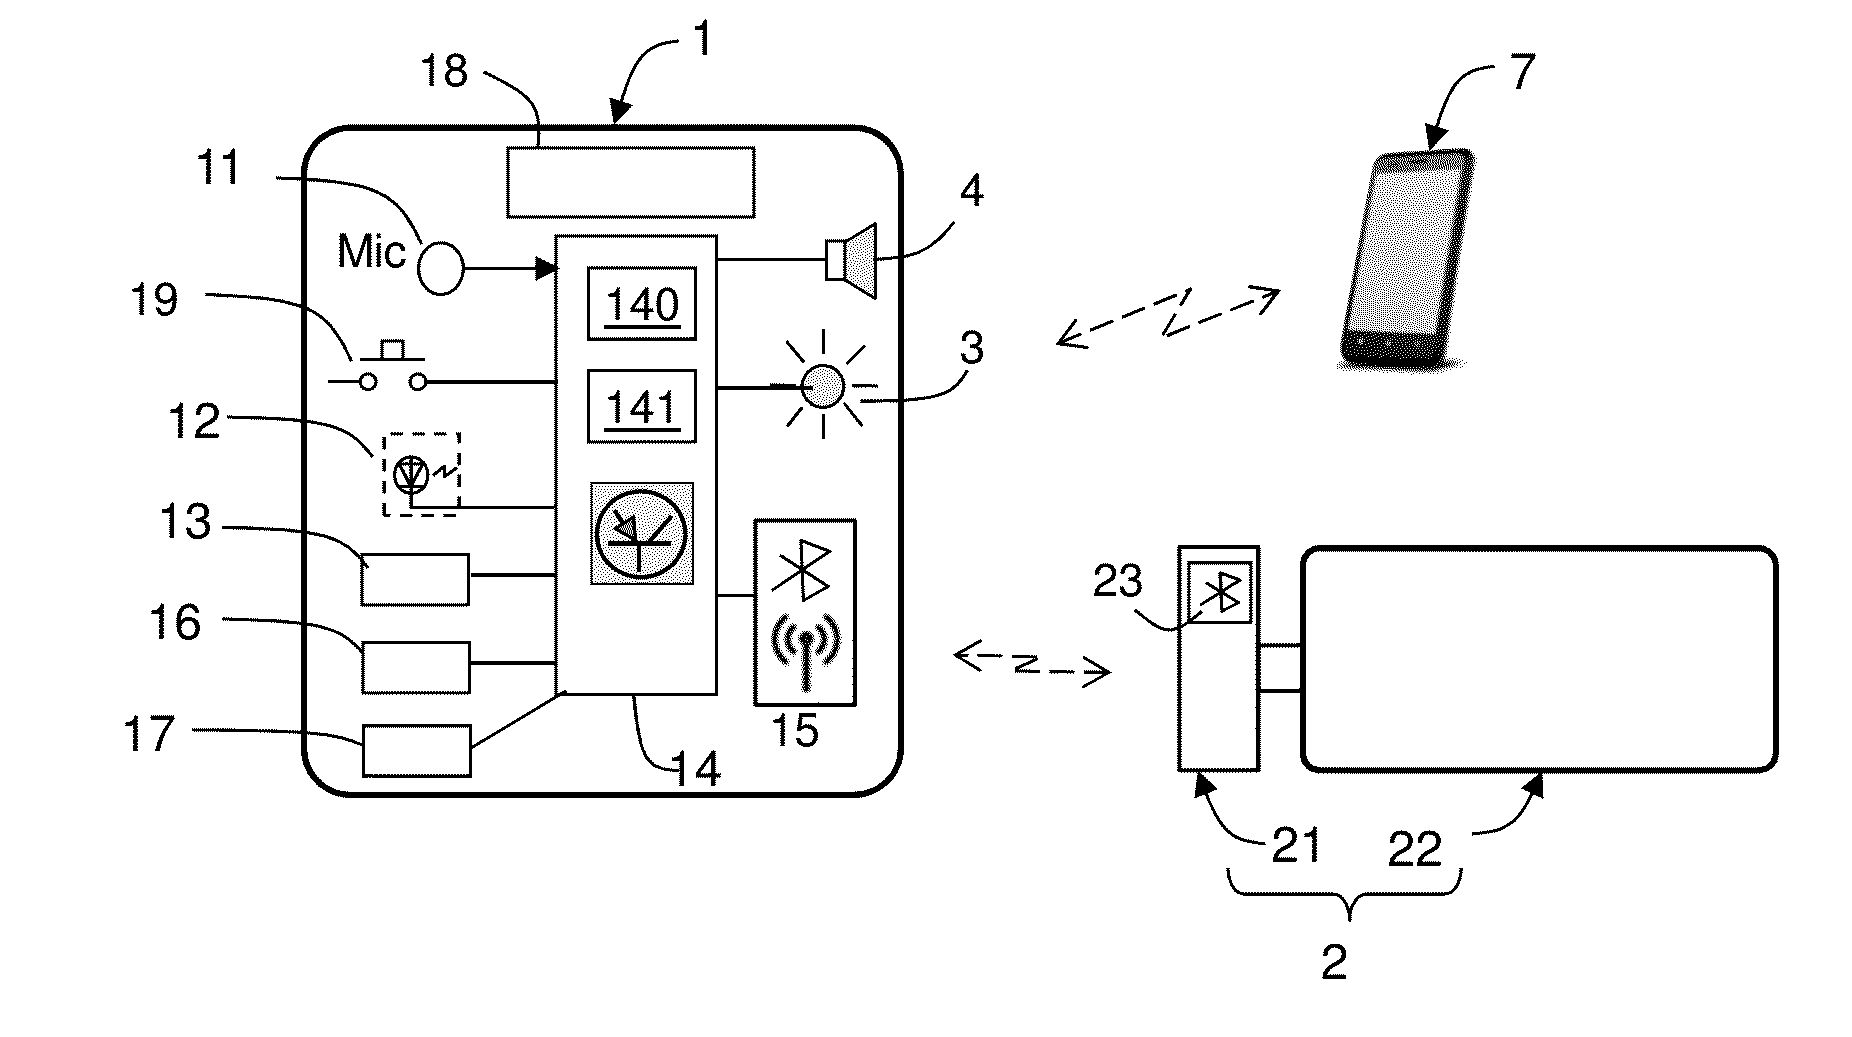 System and method to monitor and assist individual's sleep